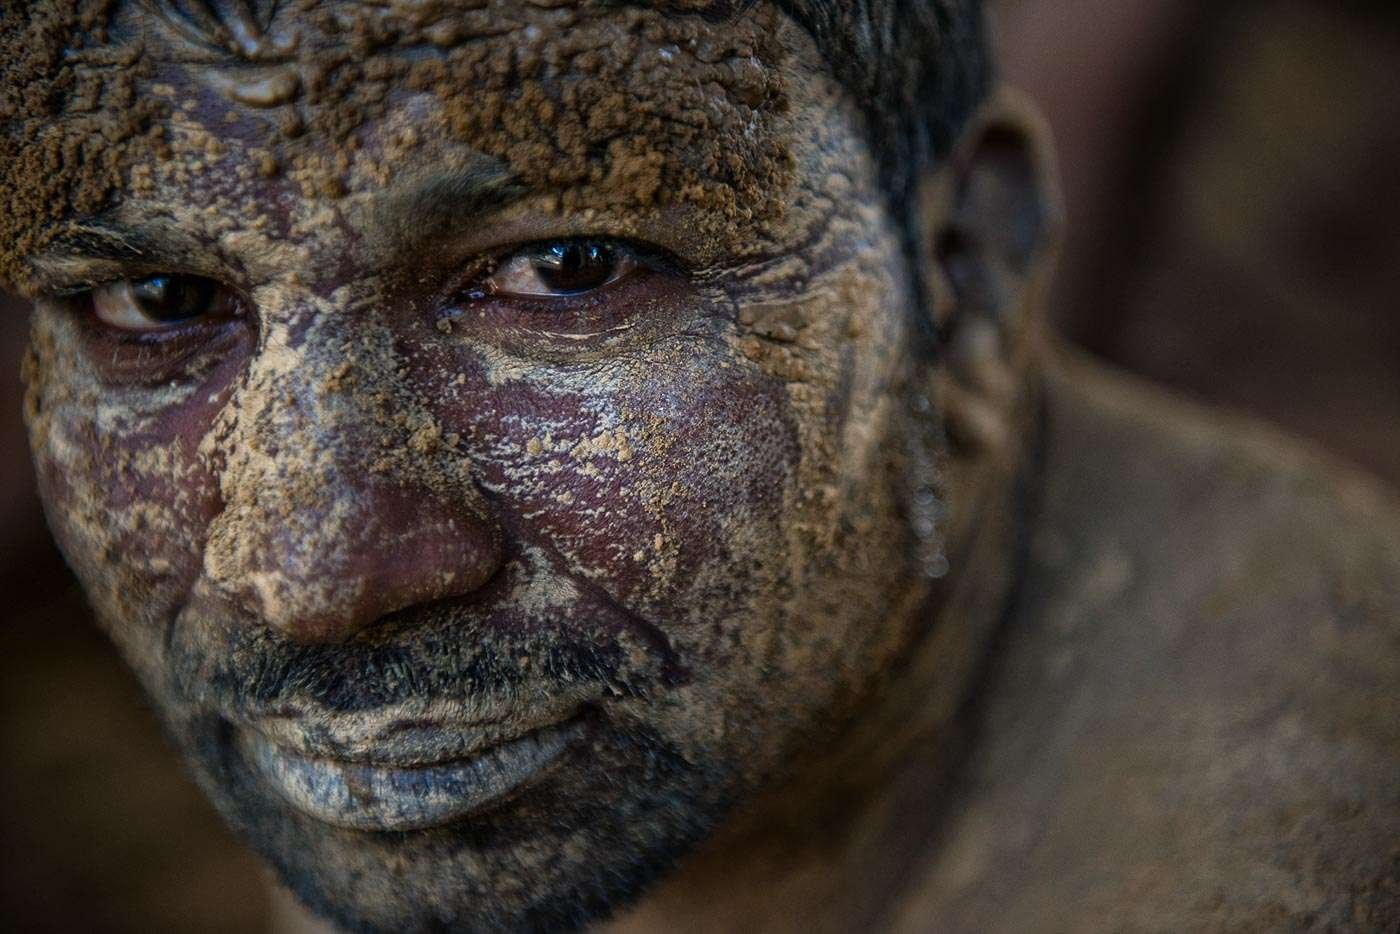 Before and after each wrestling match, Kushti wrestlers rub a special mix of dirt and other ingredients into their skin.